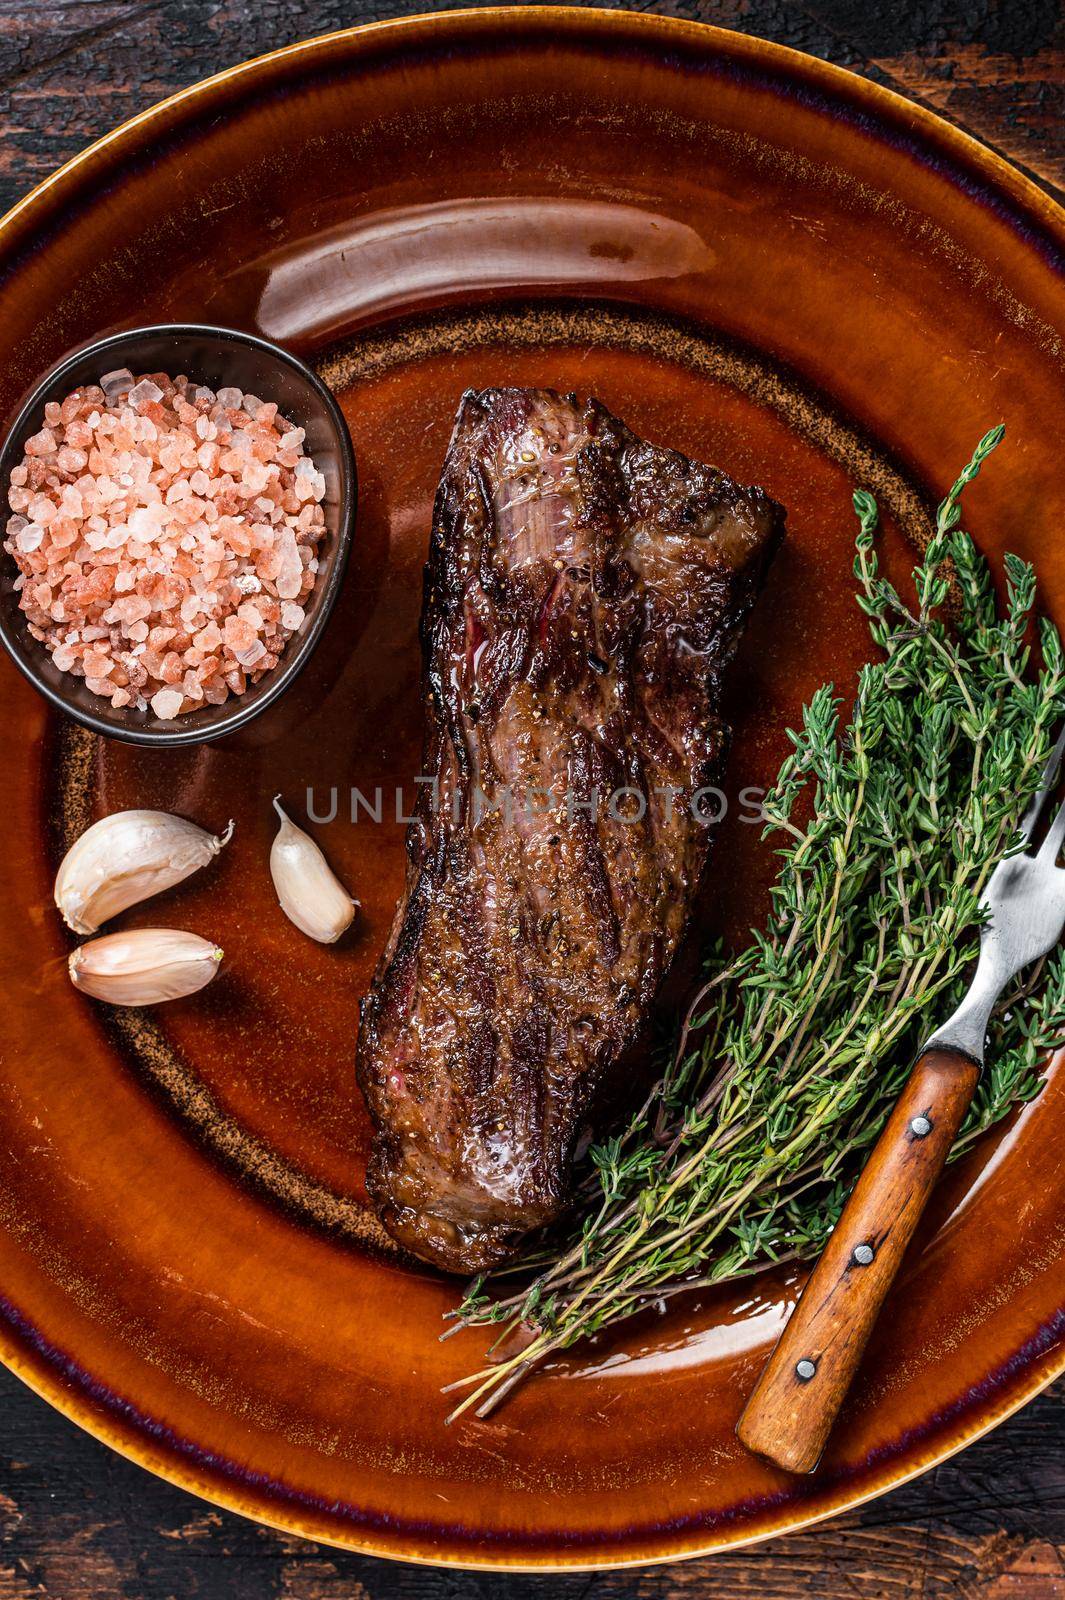 Grilled machete skirt beef steak on rustic plate with herbs and pink salt. Dark wooden background. Top view by Composter